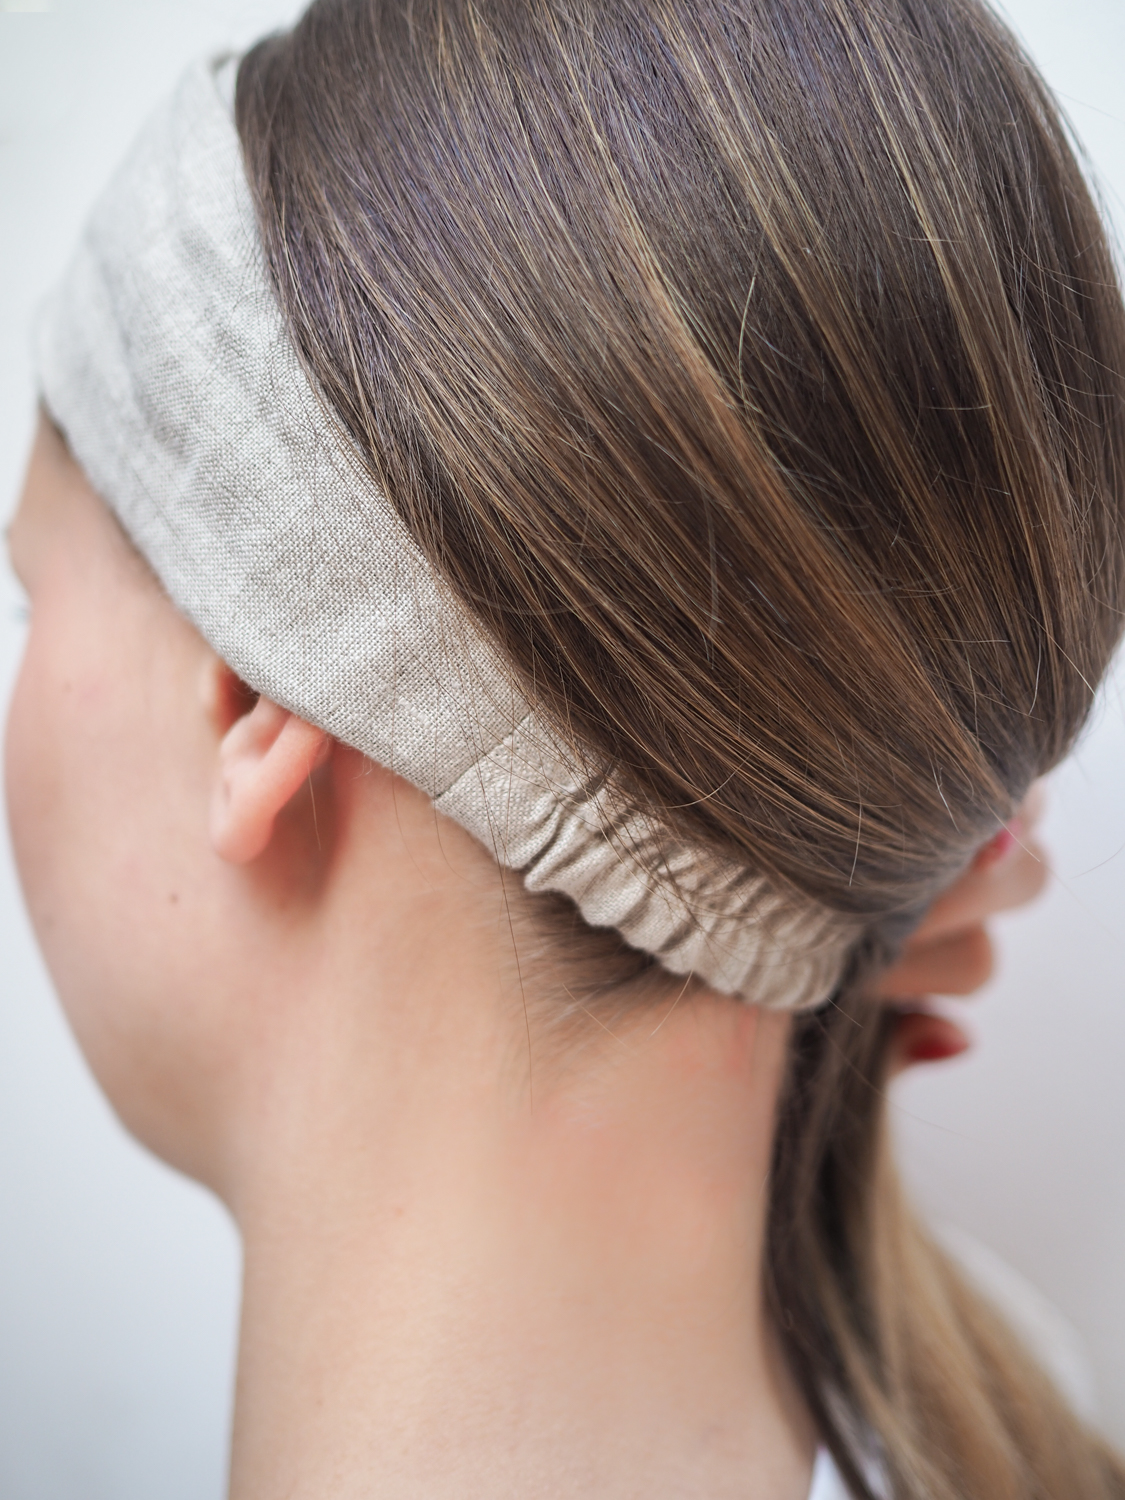 Natural linen headband | perfect for summer outfits!